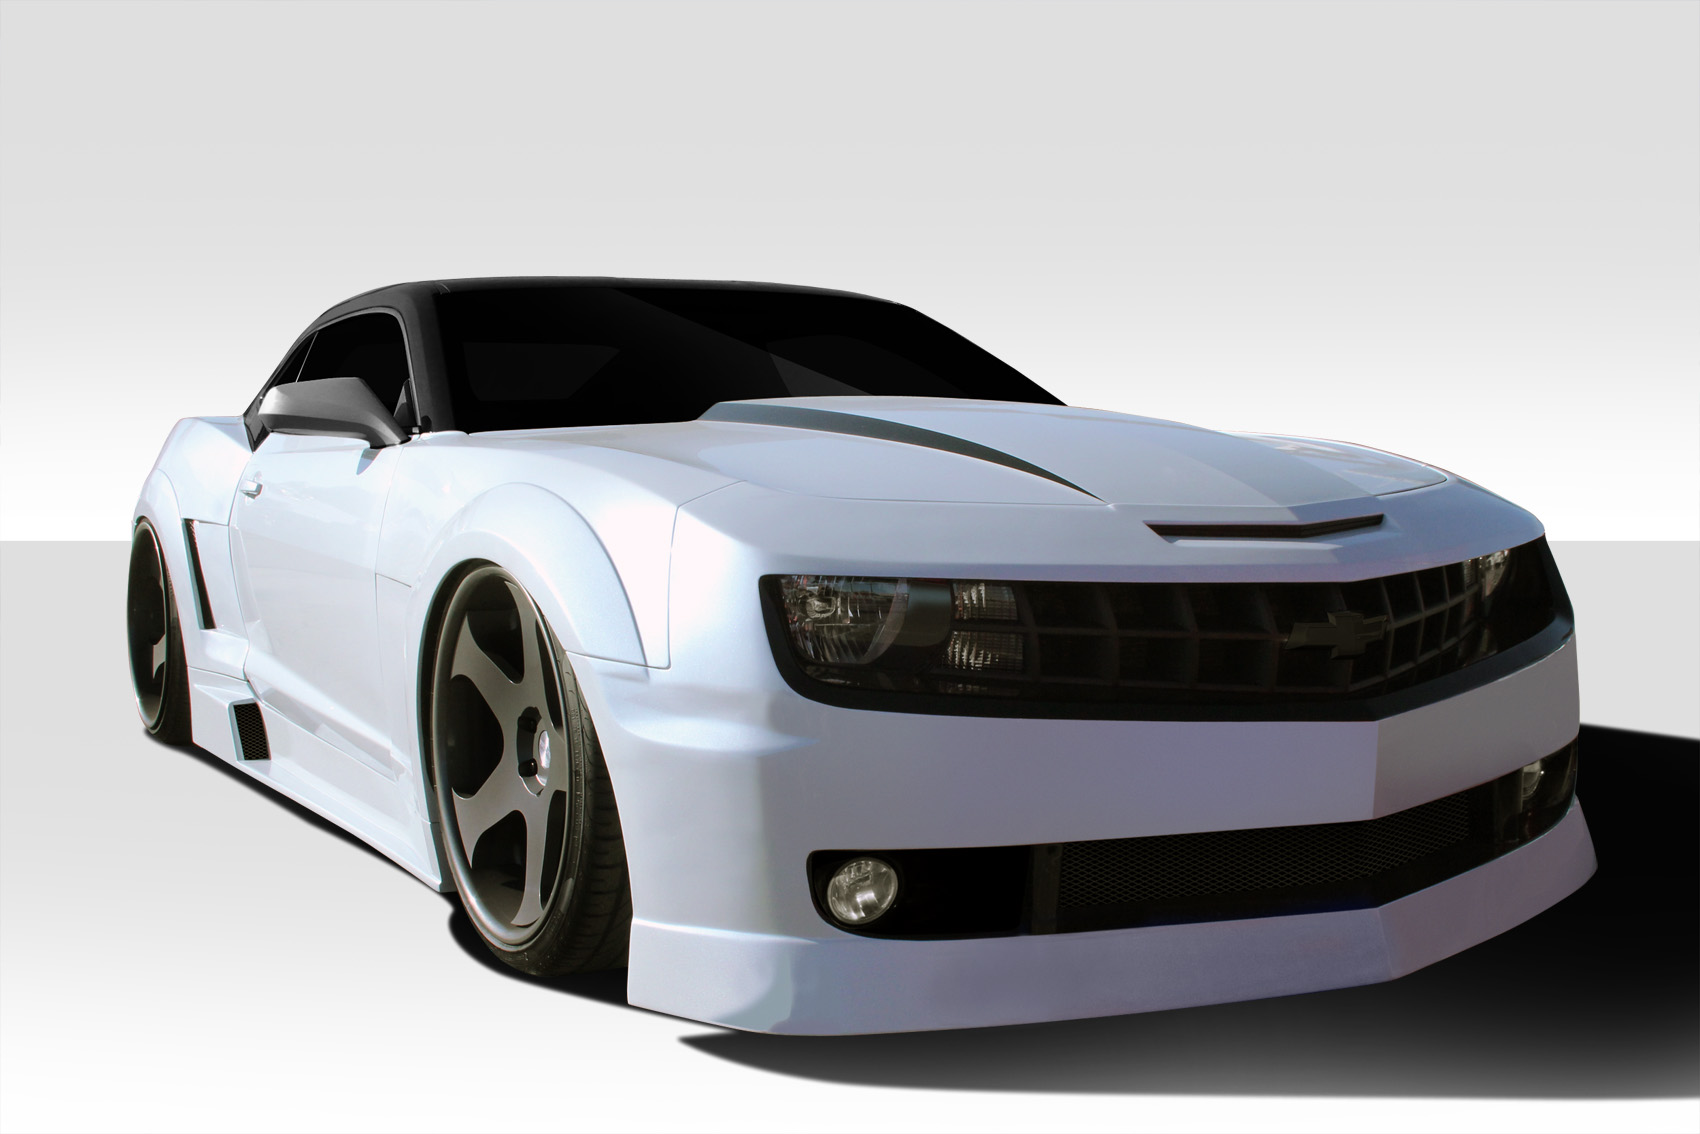 2010-2013 Chevrolet Camaro Duraflex Circuit Wide Body Kit - 8 Piece - Includes Circuit Wide Body Front Bumper Cover (105814) Circuit Wide Body Side Skirts Rocker Panels (105815) Circuit Wide Body Rear Bumper Cover (105816) Circuit Wide Body Front Fenders 